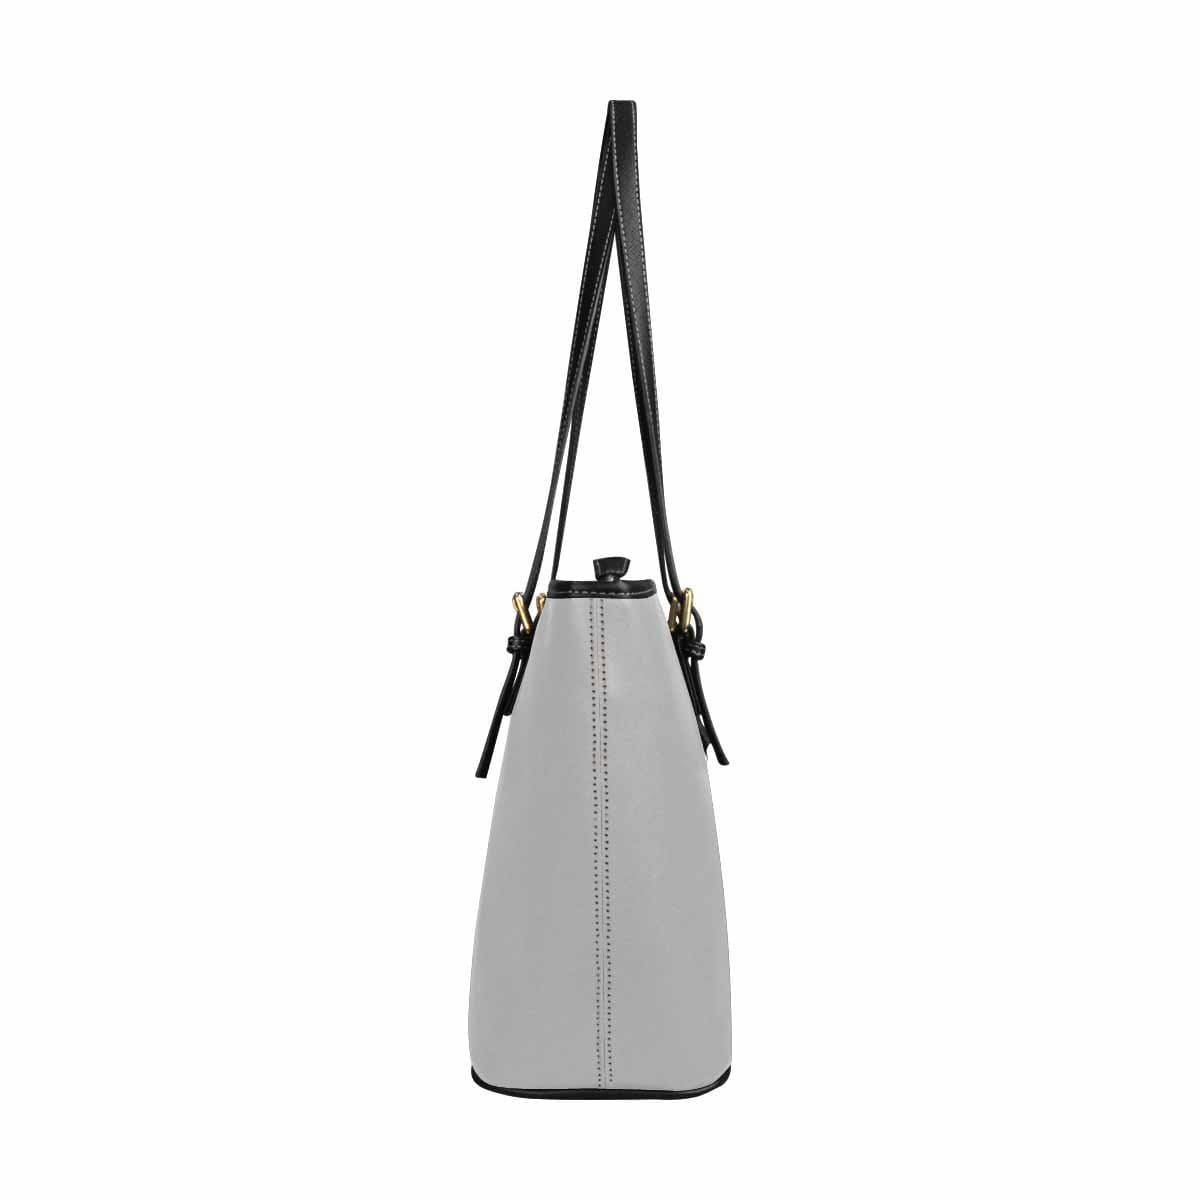 Large Leather Tote Shoulder Bag - Light Grey - Bags | Leather Tote Bags